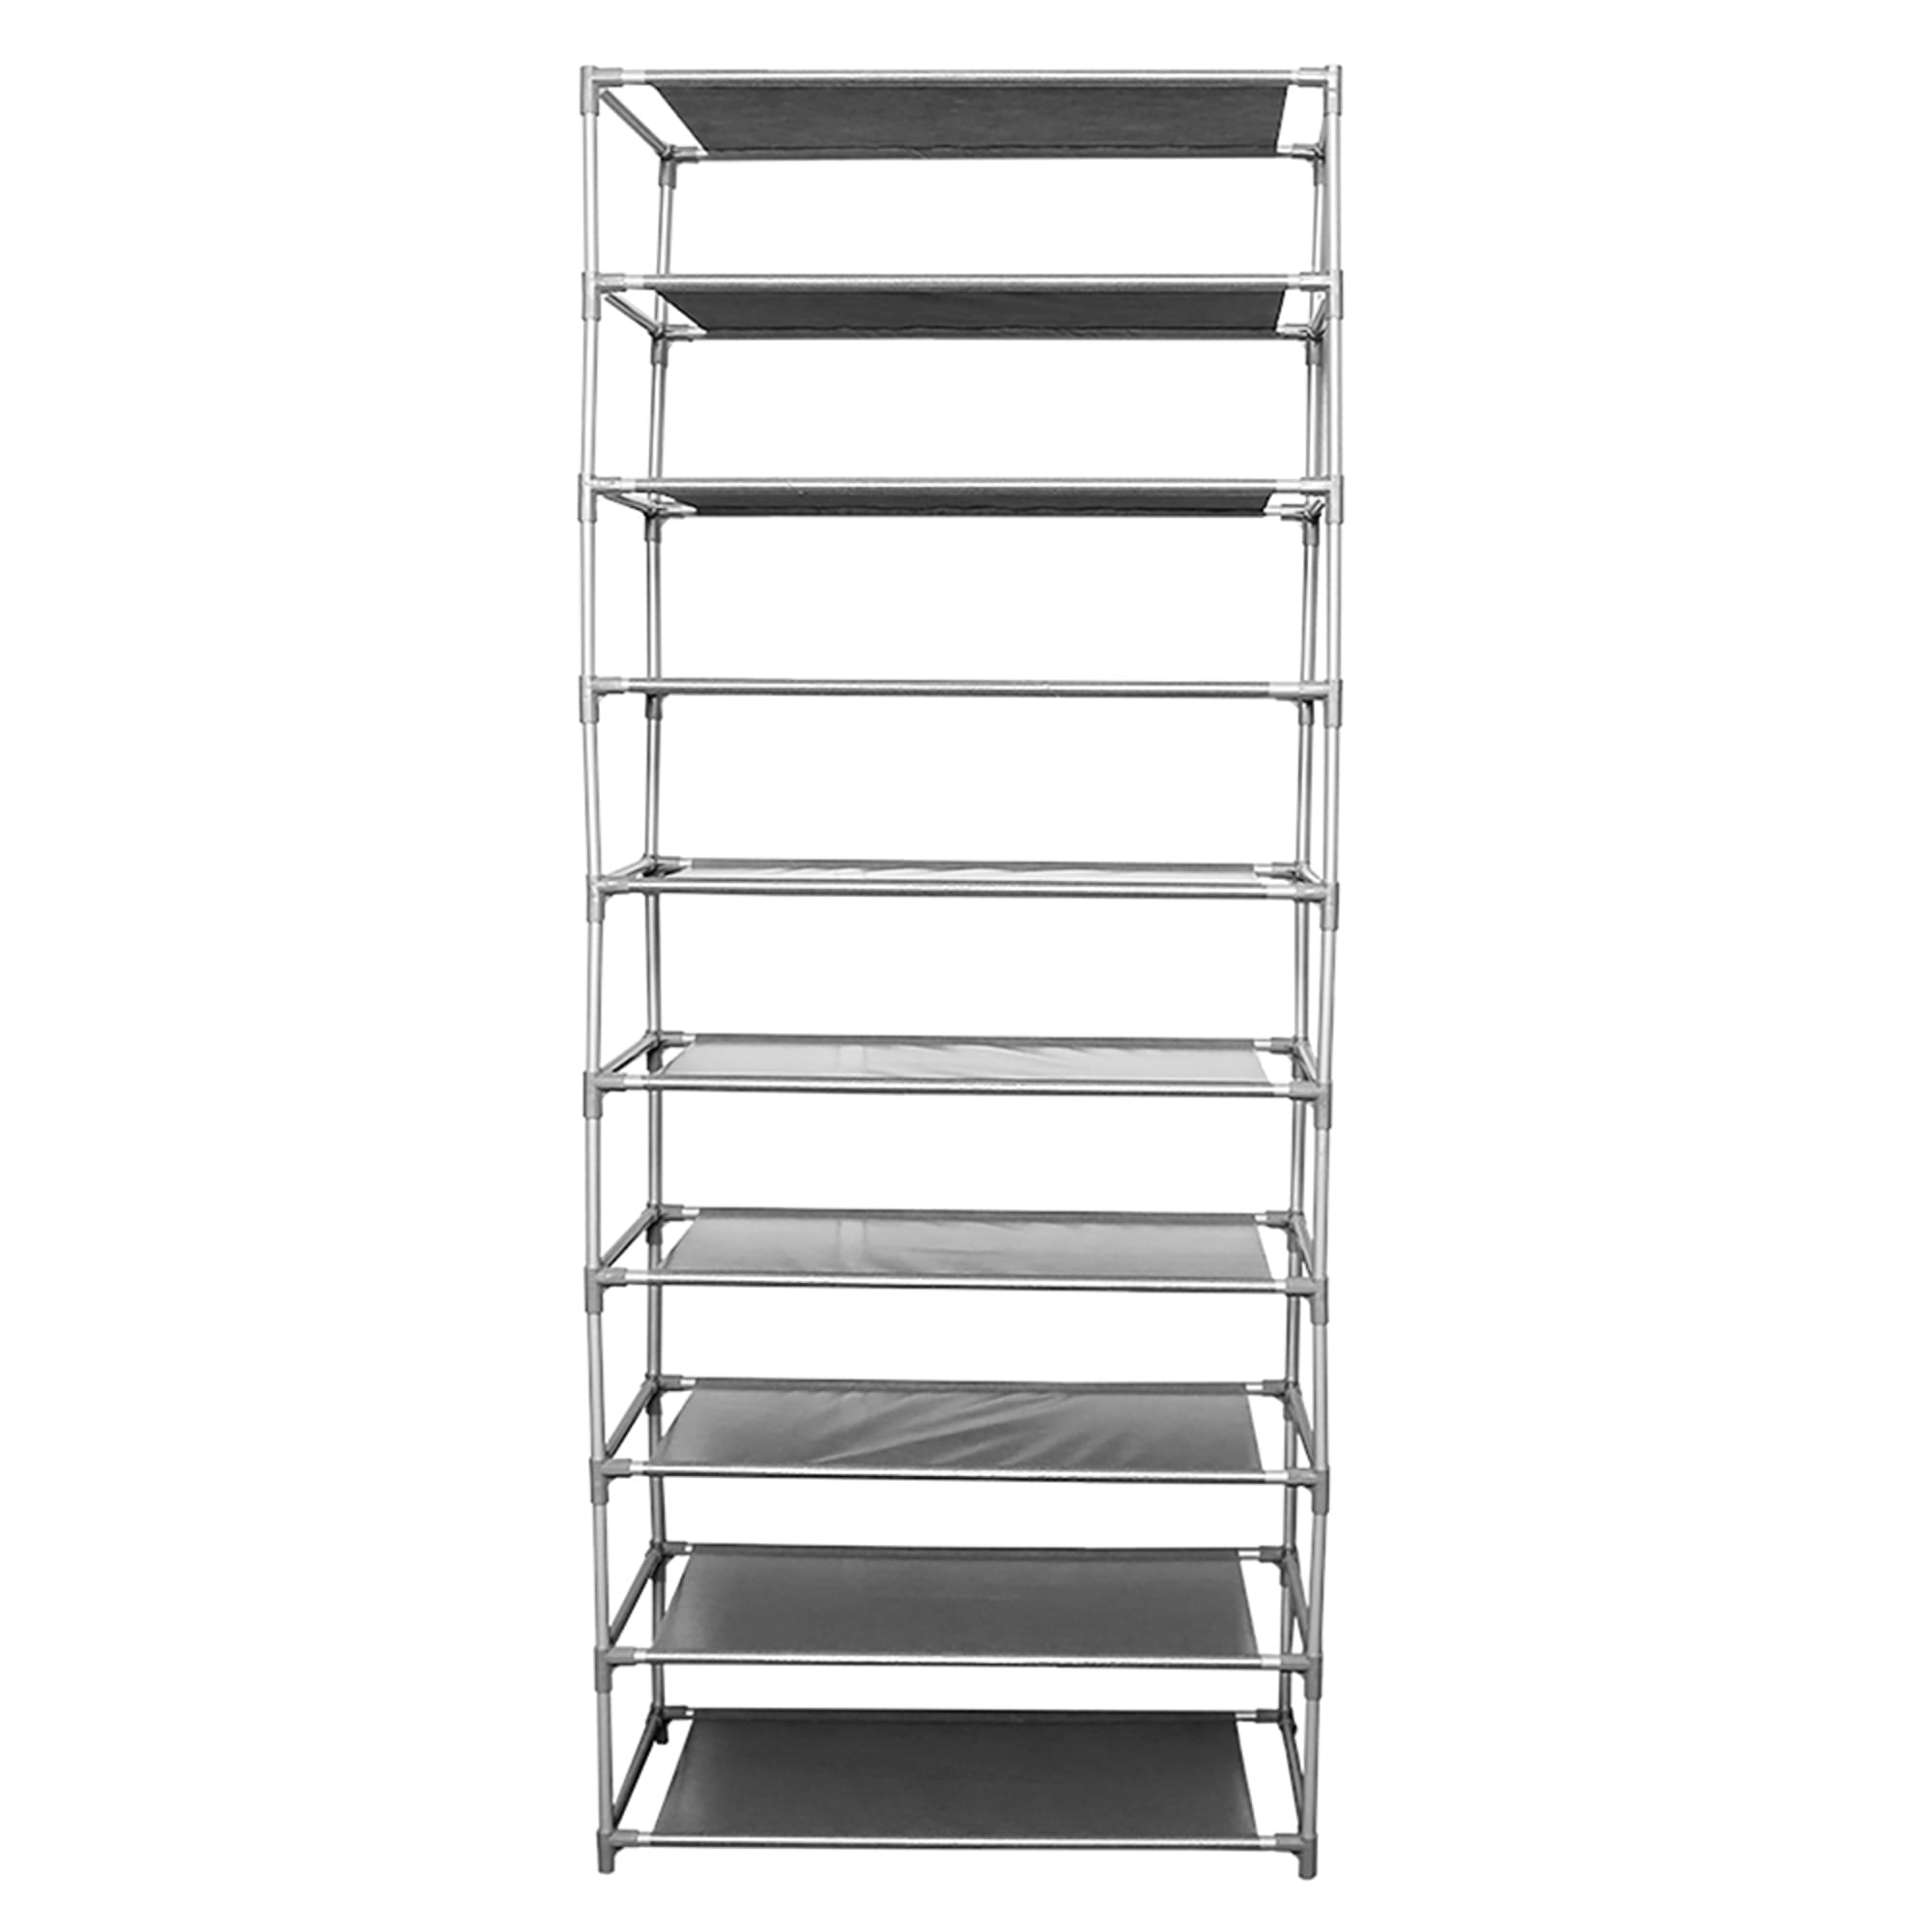 Home Basics 30  Pair Non-Woven Multi-Purpose Stackable Free-Standing Shoe Rack, Grey $20.00 EACH, CASE PACK OF 6